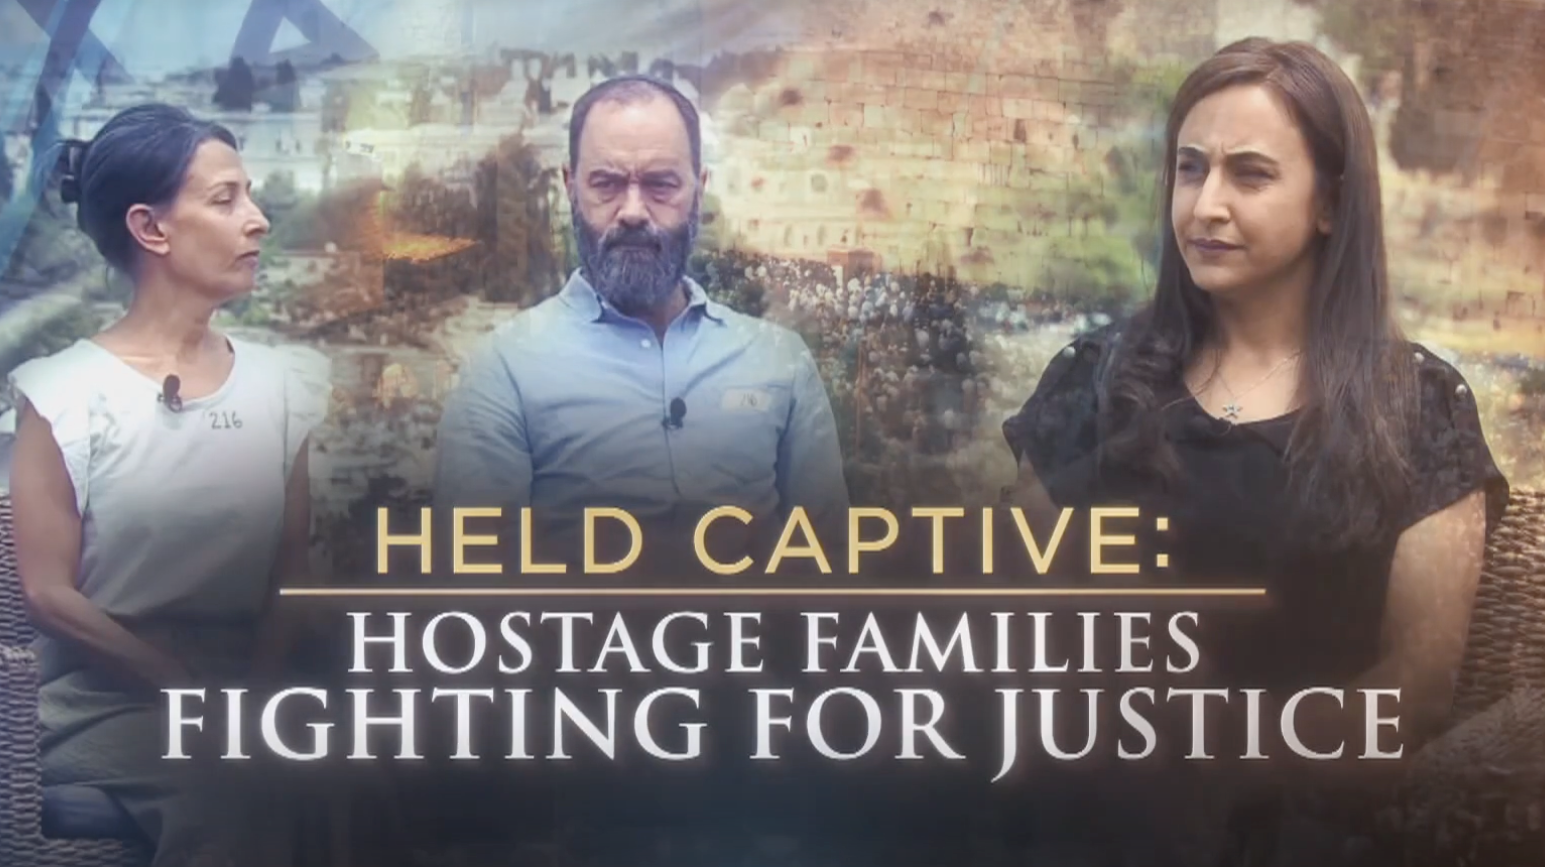 Held Captive: Hostage Families Fighting For Justice